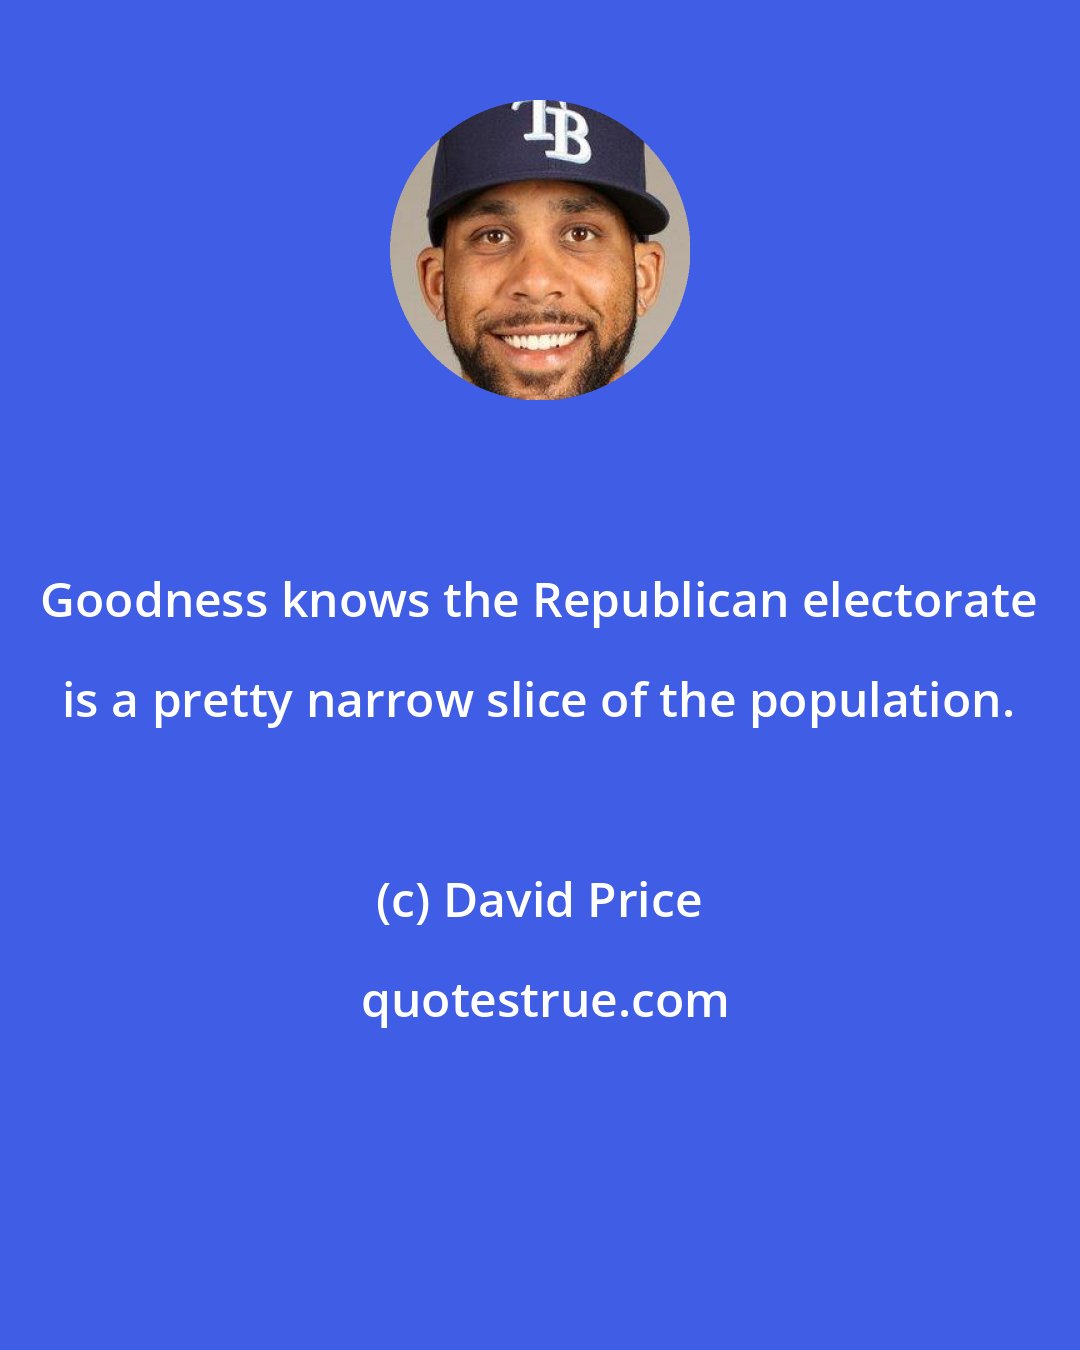 David Price: Goodness knows the Republican electorate is a pretty narrow slice of the population.